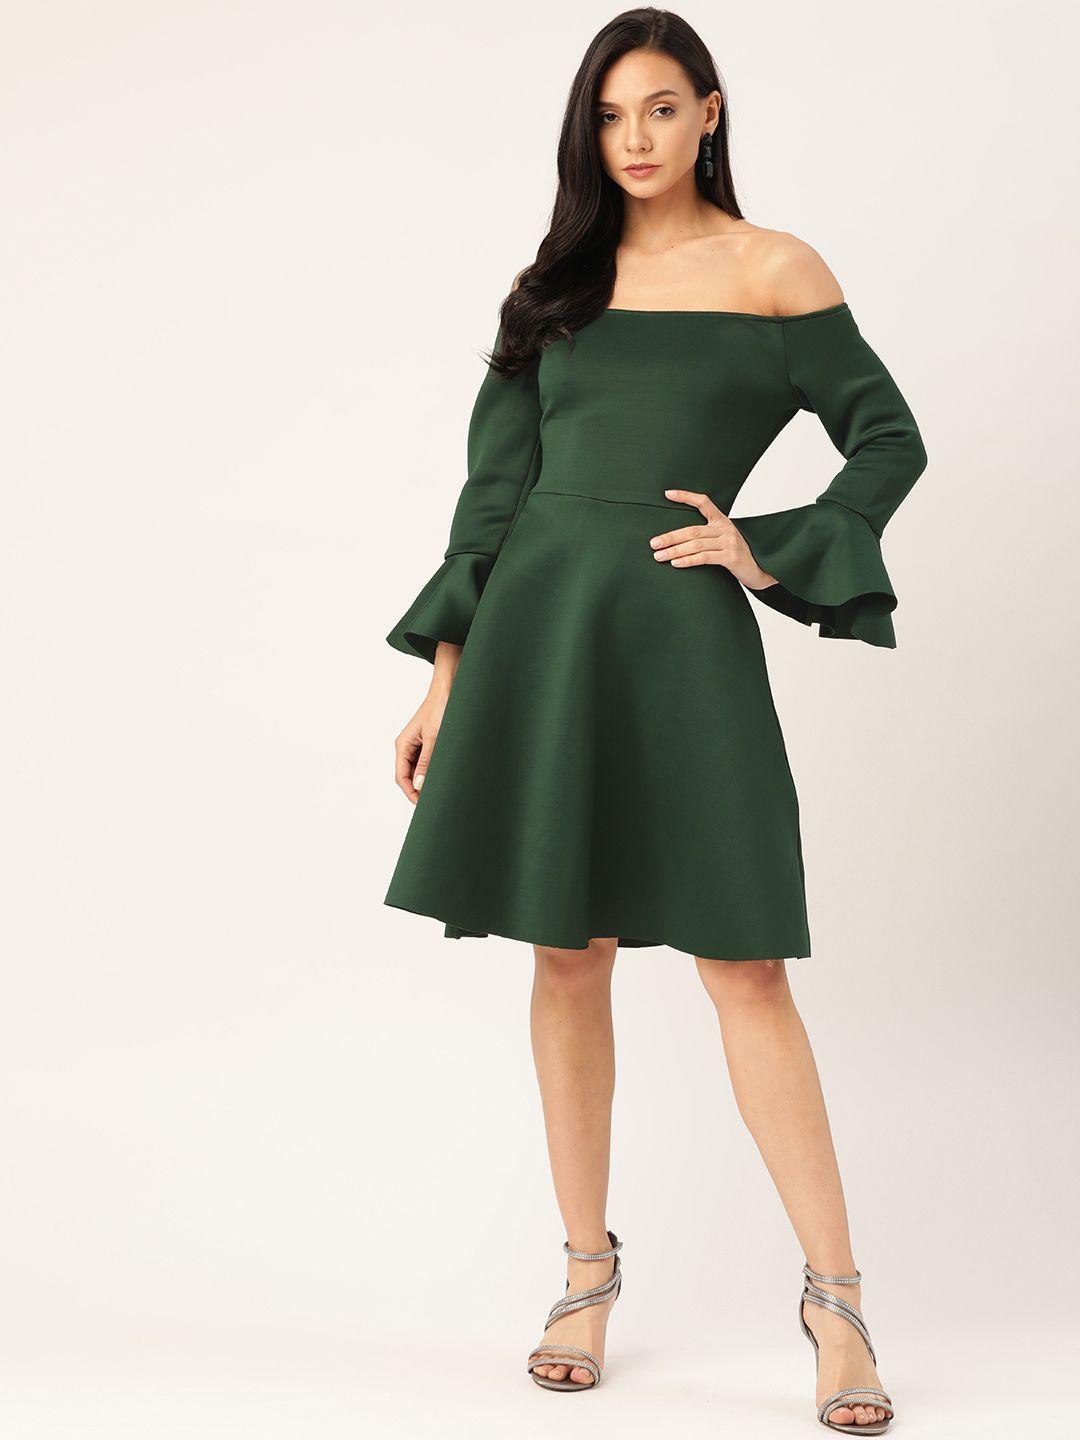 dodo-&-moa-women-teal-green-solid-off-shoulder-fit-and-flare-dress-with-bell-sleeves